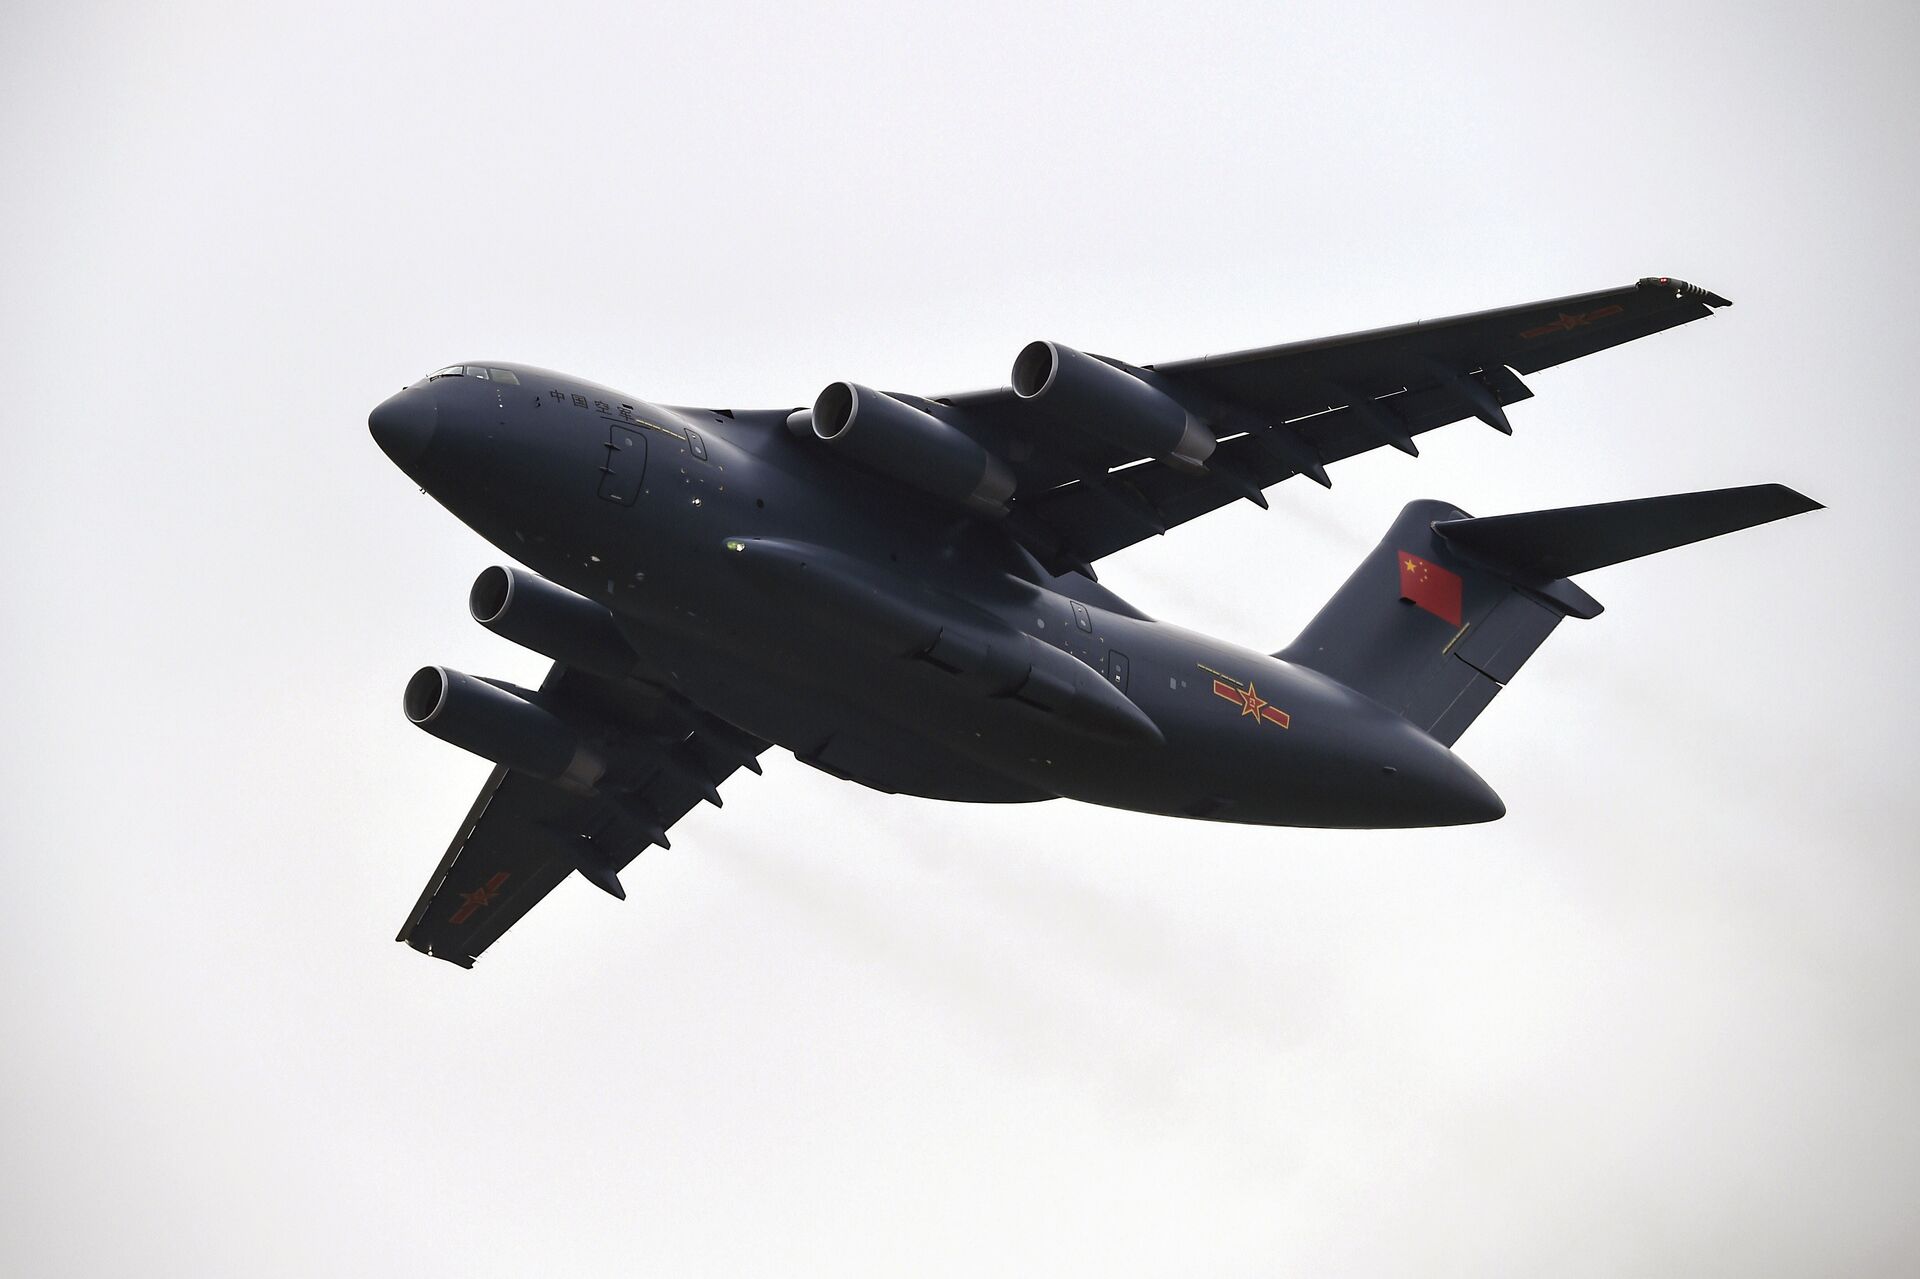 A Xian Y-20 heavy transport aircraft flies past during the Zhuhai Air Show in Zhuhai, southern China's Guangdong province on November 1, 2016. - Sputnik International, 1920, 14.11.2023